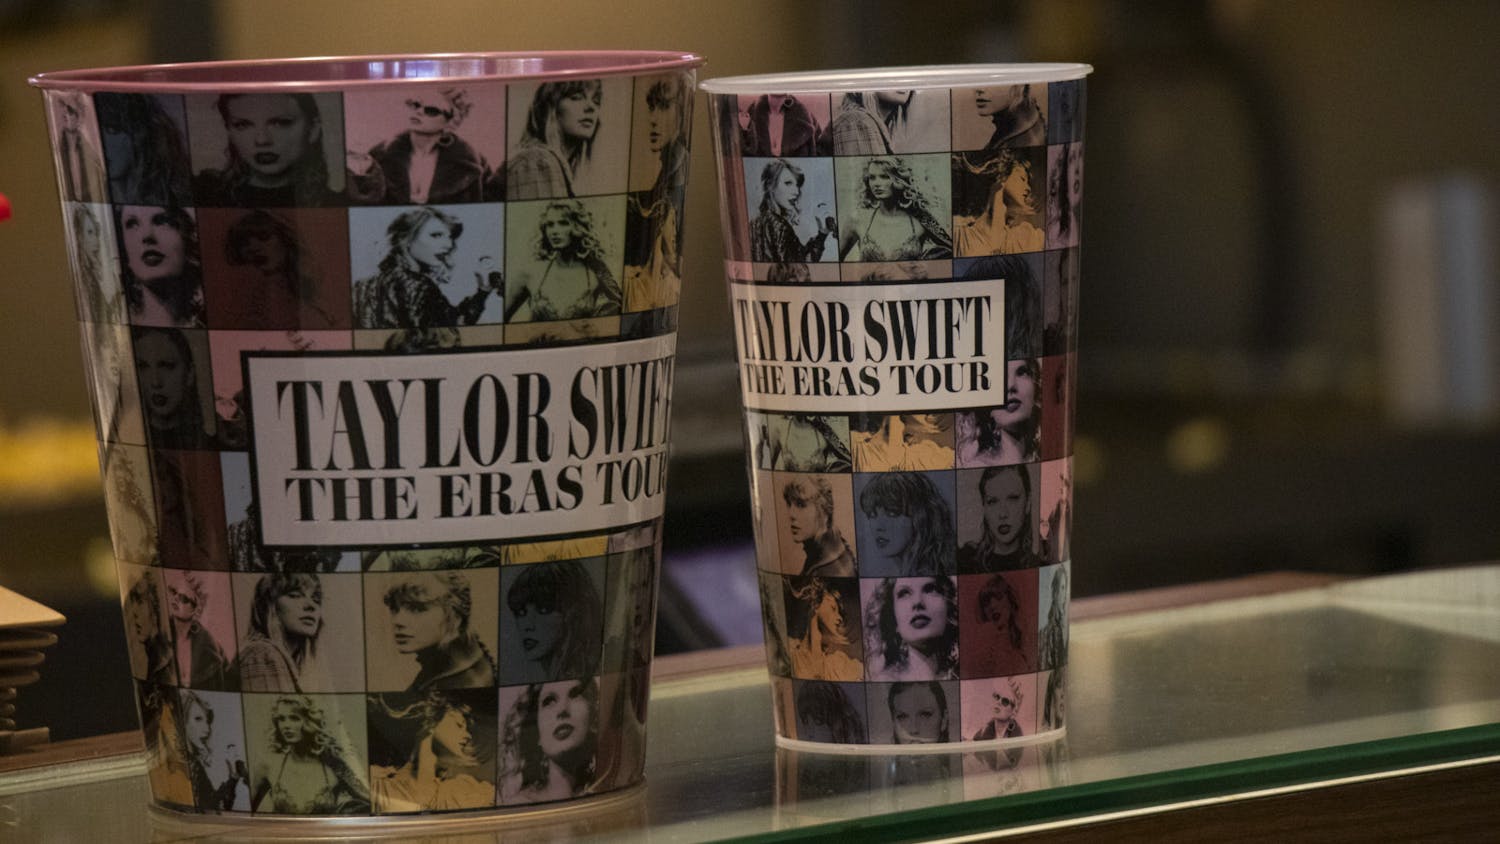 An Eras-themed popcorn bucket and drink cup sit ready for customers to purchase at AMC Harbison 14. Taylor Swift fans gathered in theaters across the country over the weekend to attend the widely-anticipated Eras Tour concert film.